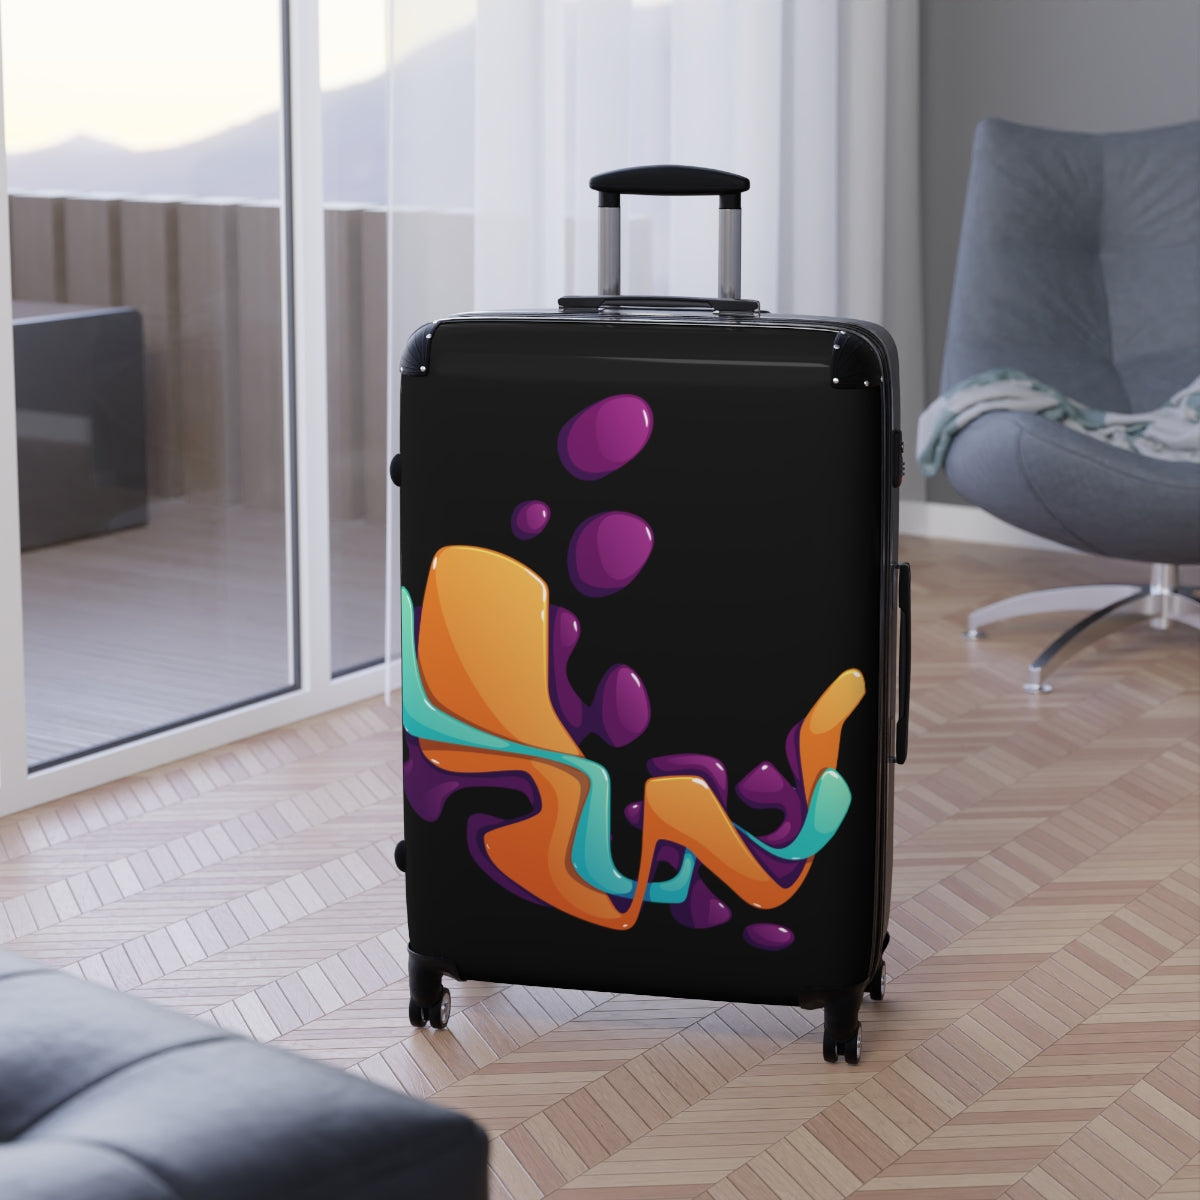  CARRY-ON LUGGAGE WITH BEAUTIFUL ARTISTIC DESIGN BY ARTZIRA, ALL SIZES, DOUBLE WHEELED SPINNER